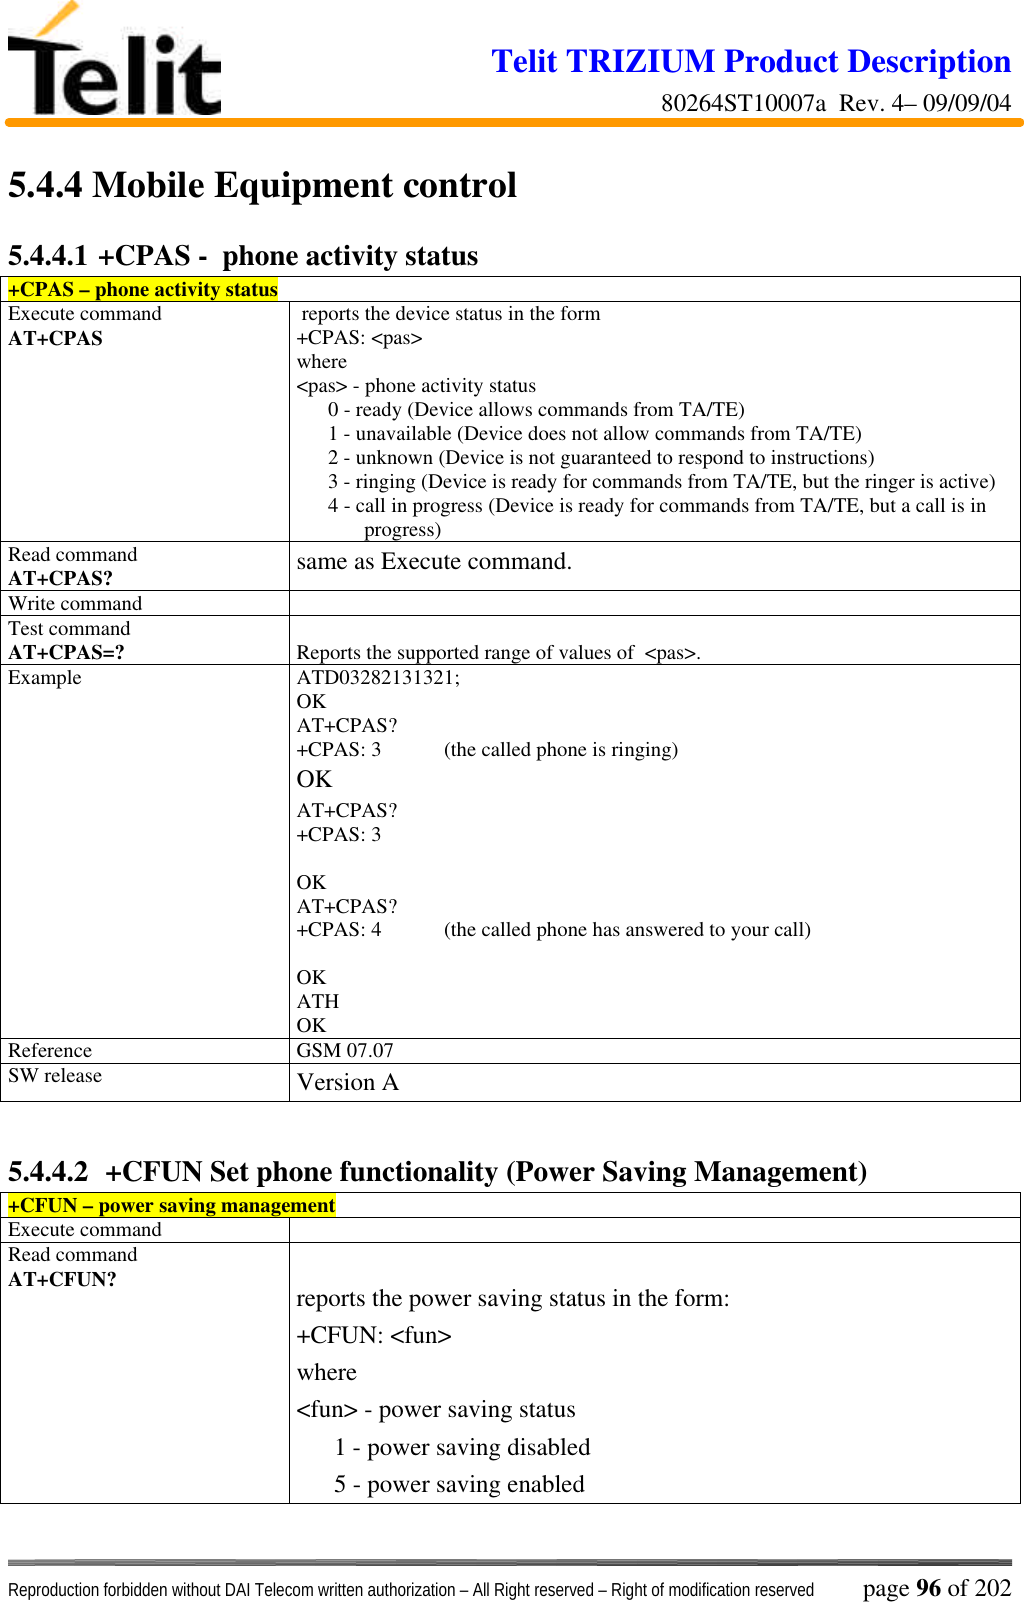 Telit TRIZIUM Product Description80264ST10007a  Rev. 4– 09/09/04Reproduction forbidden without DAI Telecom written authorization – All Right reserved – Right of modification reserved page 96 of 2025.4.4  Mobile Equipment control5.4.4.1 +CPAS -  phone activity status+CPAS – phone activity statusExecute commandAT+CPAS  reports the device status in the form+CPAS: &lt;pas&gt;where&lt;pas&gt; - phone activity status      0 - ready (Device allows commands from TA/TE)      1 - unavailable (Device does not allow commands from TA/TE)      2 - unknown (Device is not guaranteed to respond to instructions)      3 - ringing (Device is ready for commands from TA/TE, but the ringer is active)      4 - call in progress (Device is ready for commands from TA/TE, but a call is inprogress)Read commandAT+CPAS? same as Execute command.Write commandTest commandAT+CPAS=? Reports the supported range of values of  &lt;pas&gt;.Example ATD03282131321;OKAT+CPAS?+CPAS: 3 (the called phone is ringing)OKAT+CPAS?+CPAS: 3OKAT+CPAS?+CPAS: 4 (the called phone has answered to your call)OKATHOKReference GSM 07.07SW release Version A5.4.4.2  +CFUN Set phone functionality (Power Saving Management)+CFUN – power saving managementExecute commandRead commandAT+CFUN? reports the power saving status in the form:+CFUN: &lt;fun&gt;where&lt;fun&gt; - power saving status      1 - power saving disabled      5 - power saving enabled